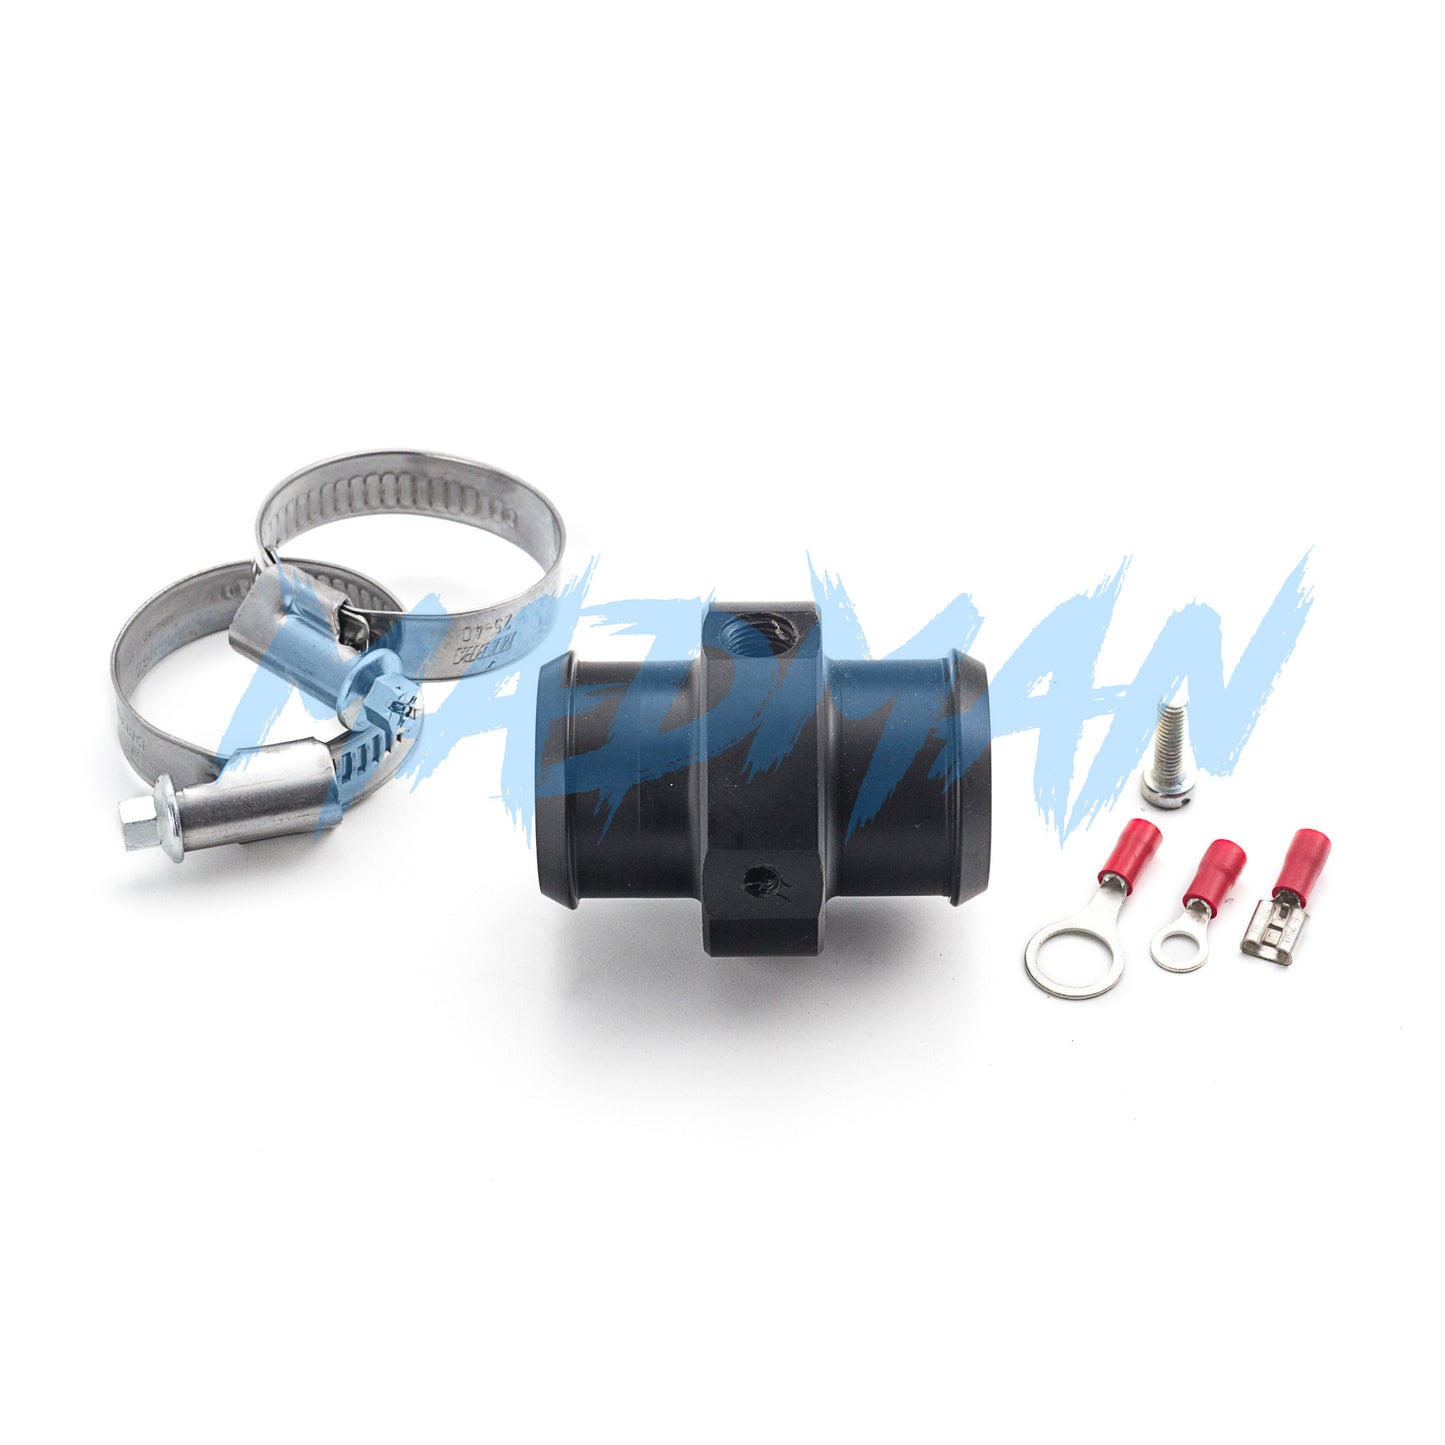 32mm (1.25") Coolant Hose Adapter